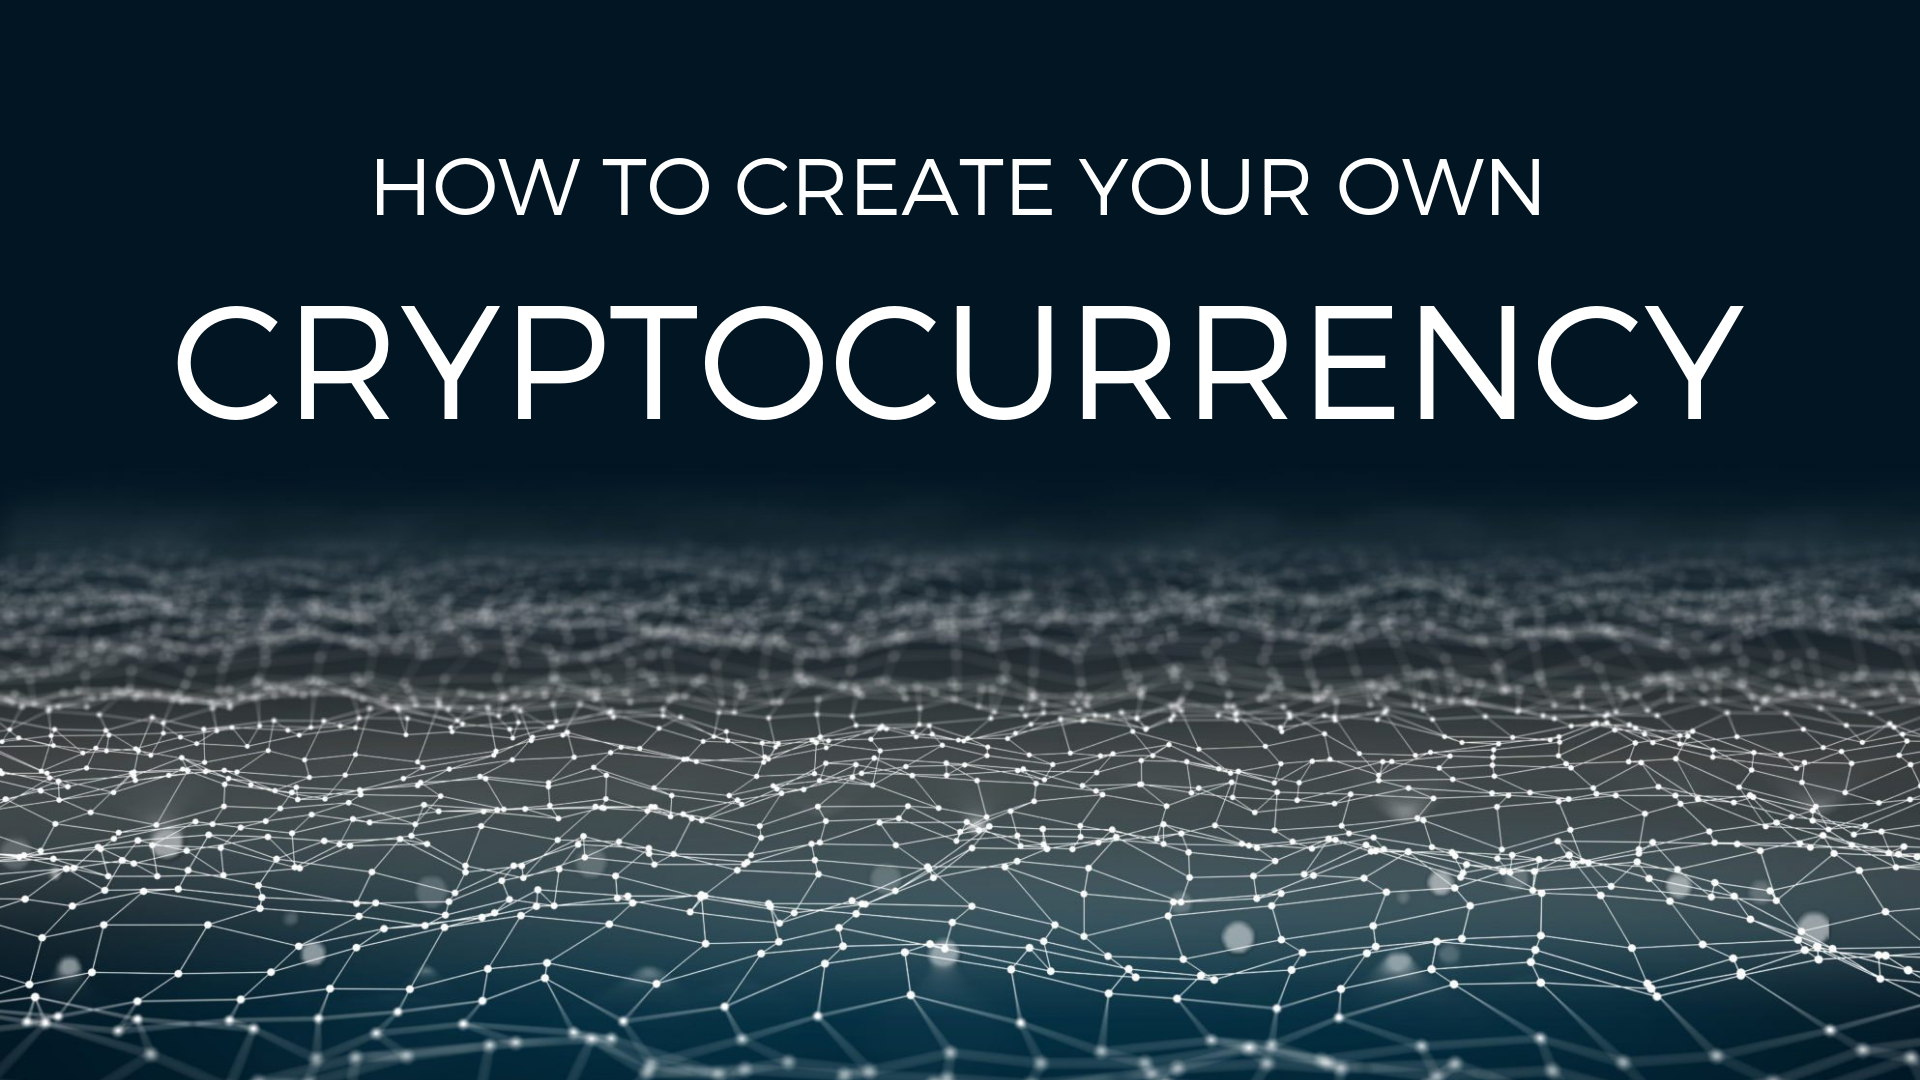 3. How to create your own cryptocurrency? - Kanga University